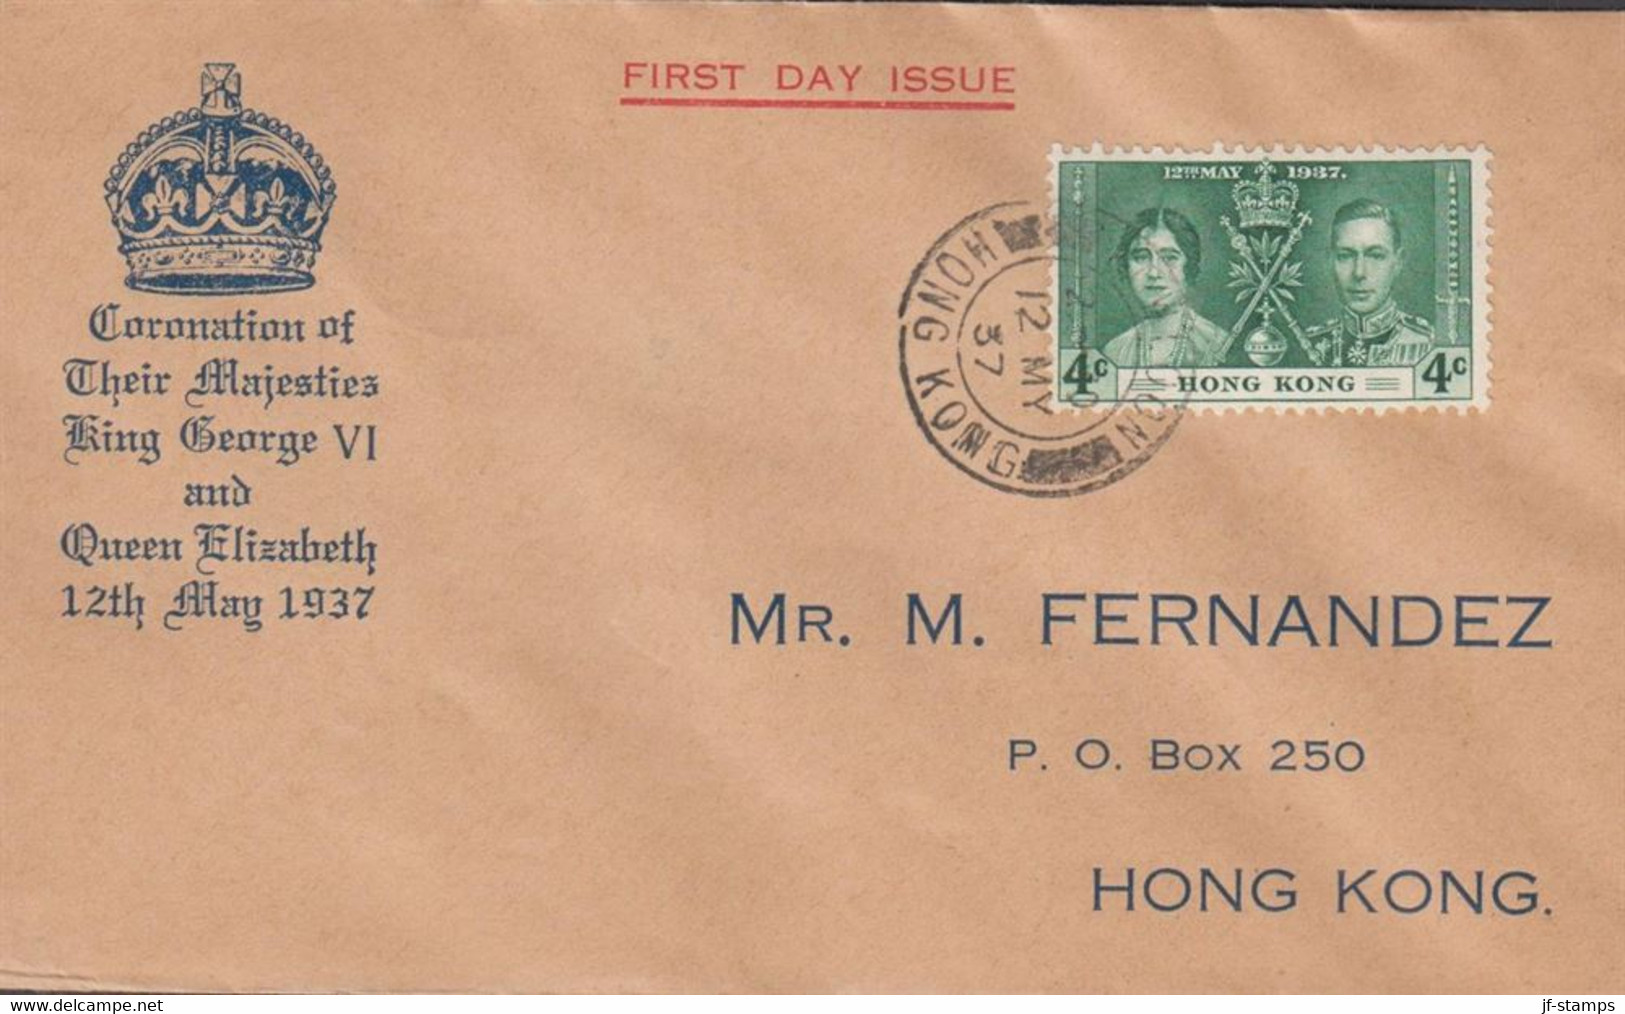 1937. HONG KONG Georg VI. 4 C Coronation On Nice FDC Cancelled FIRST DAY OF ISSUE KOWLOON HON... (Michel 136) - JF427050 - Brieven En Documenten